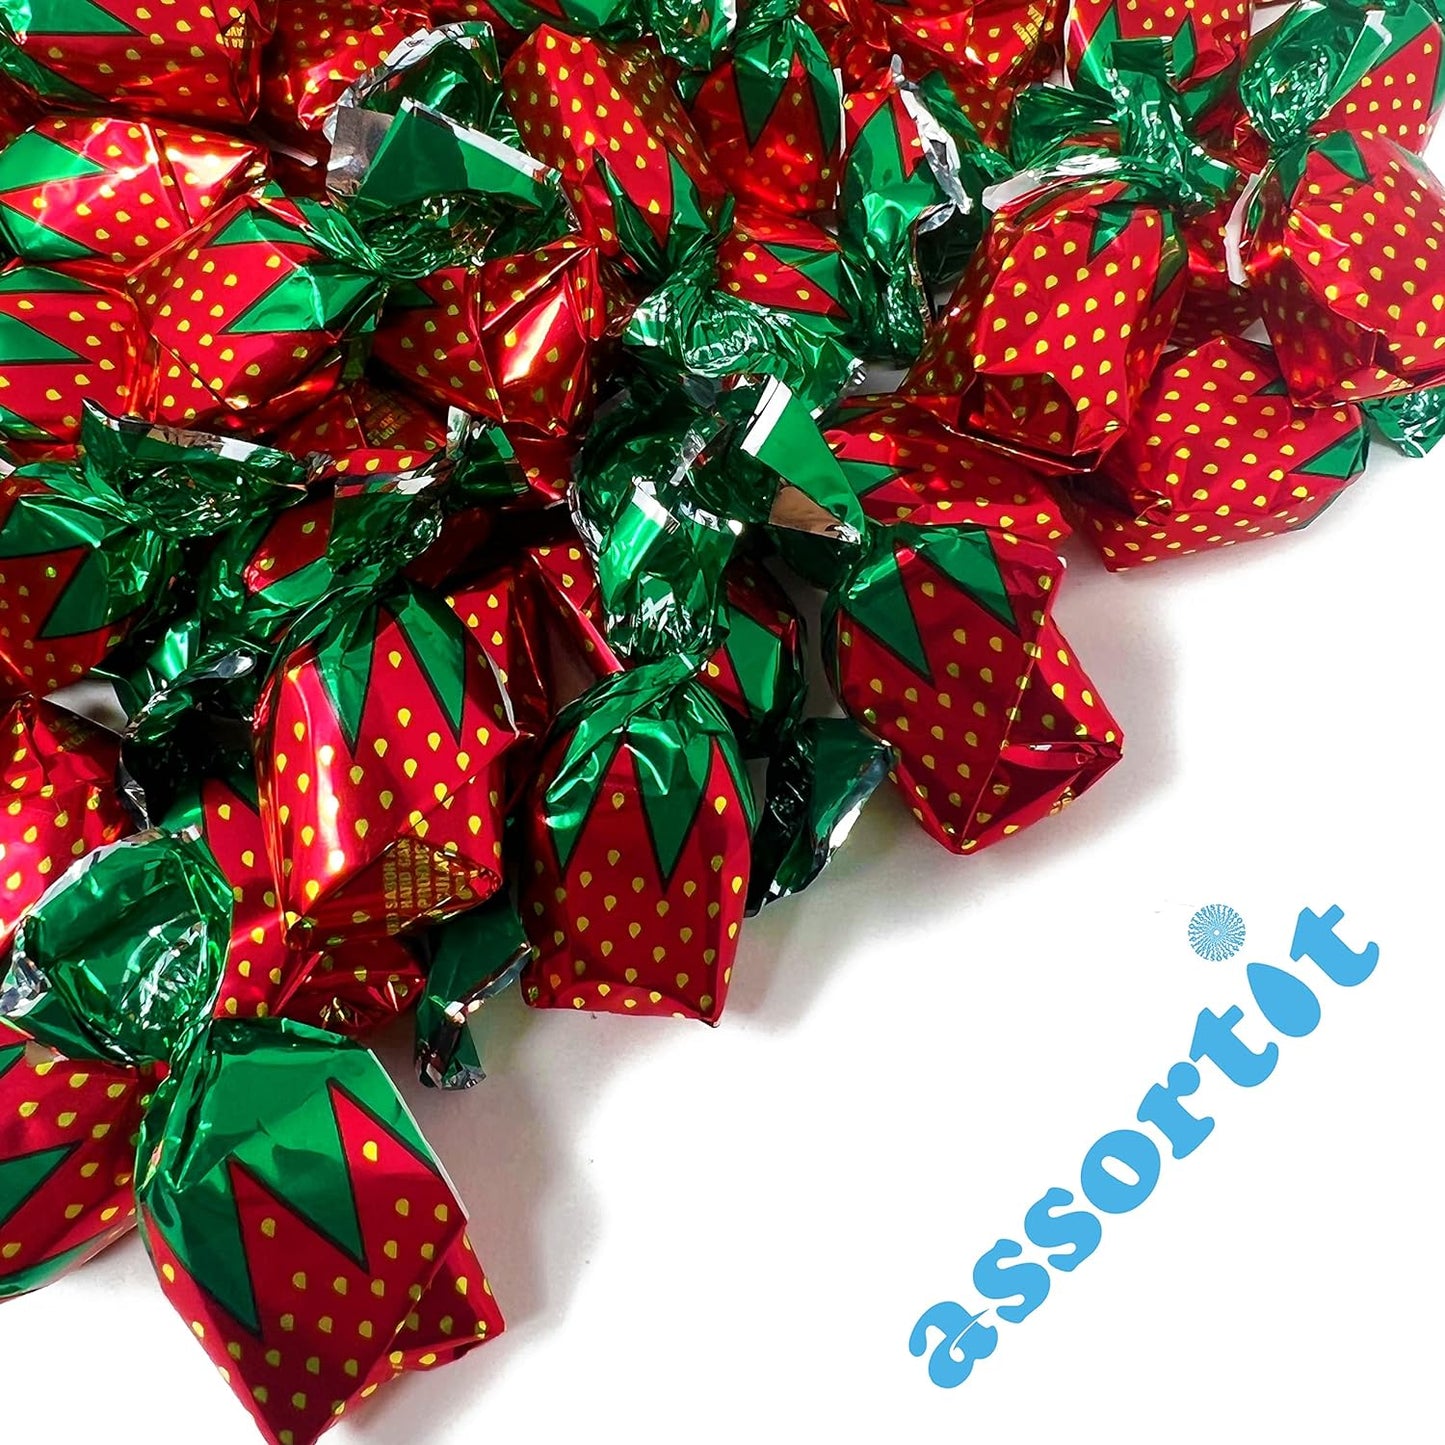 Arcor Strawberry Hard Candy - 6 lbs - Strawberry Filled With Real Strawberry Pulp - Bulk 96 oz.